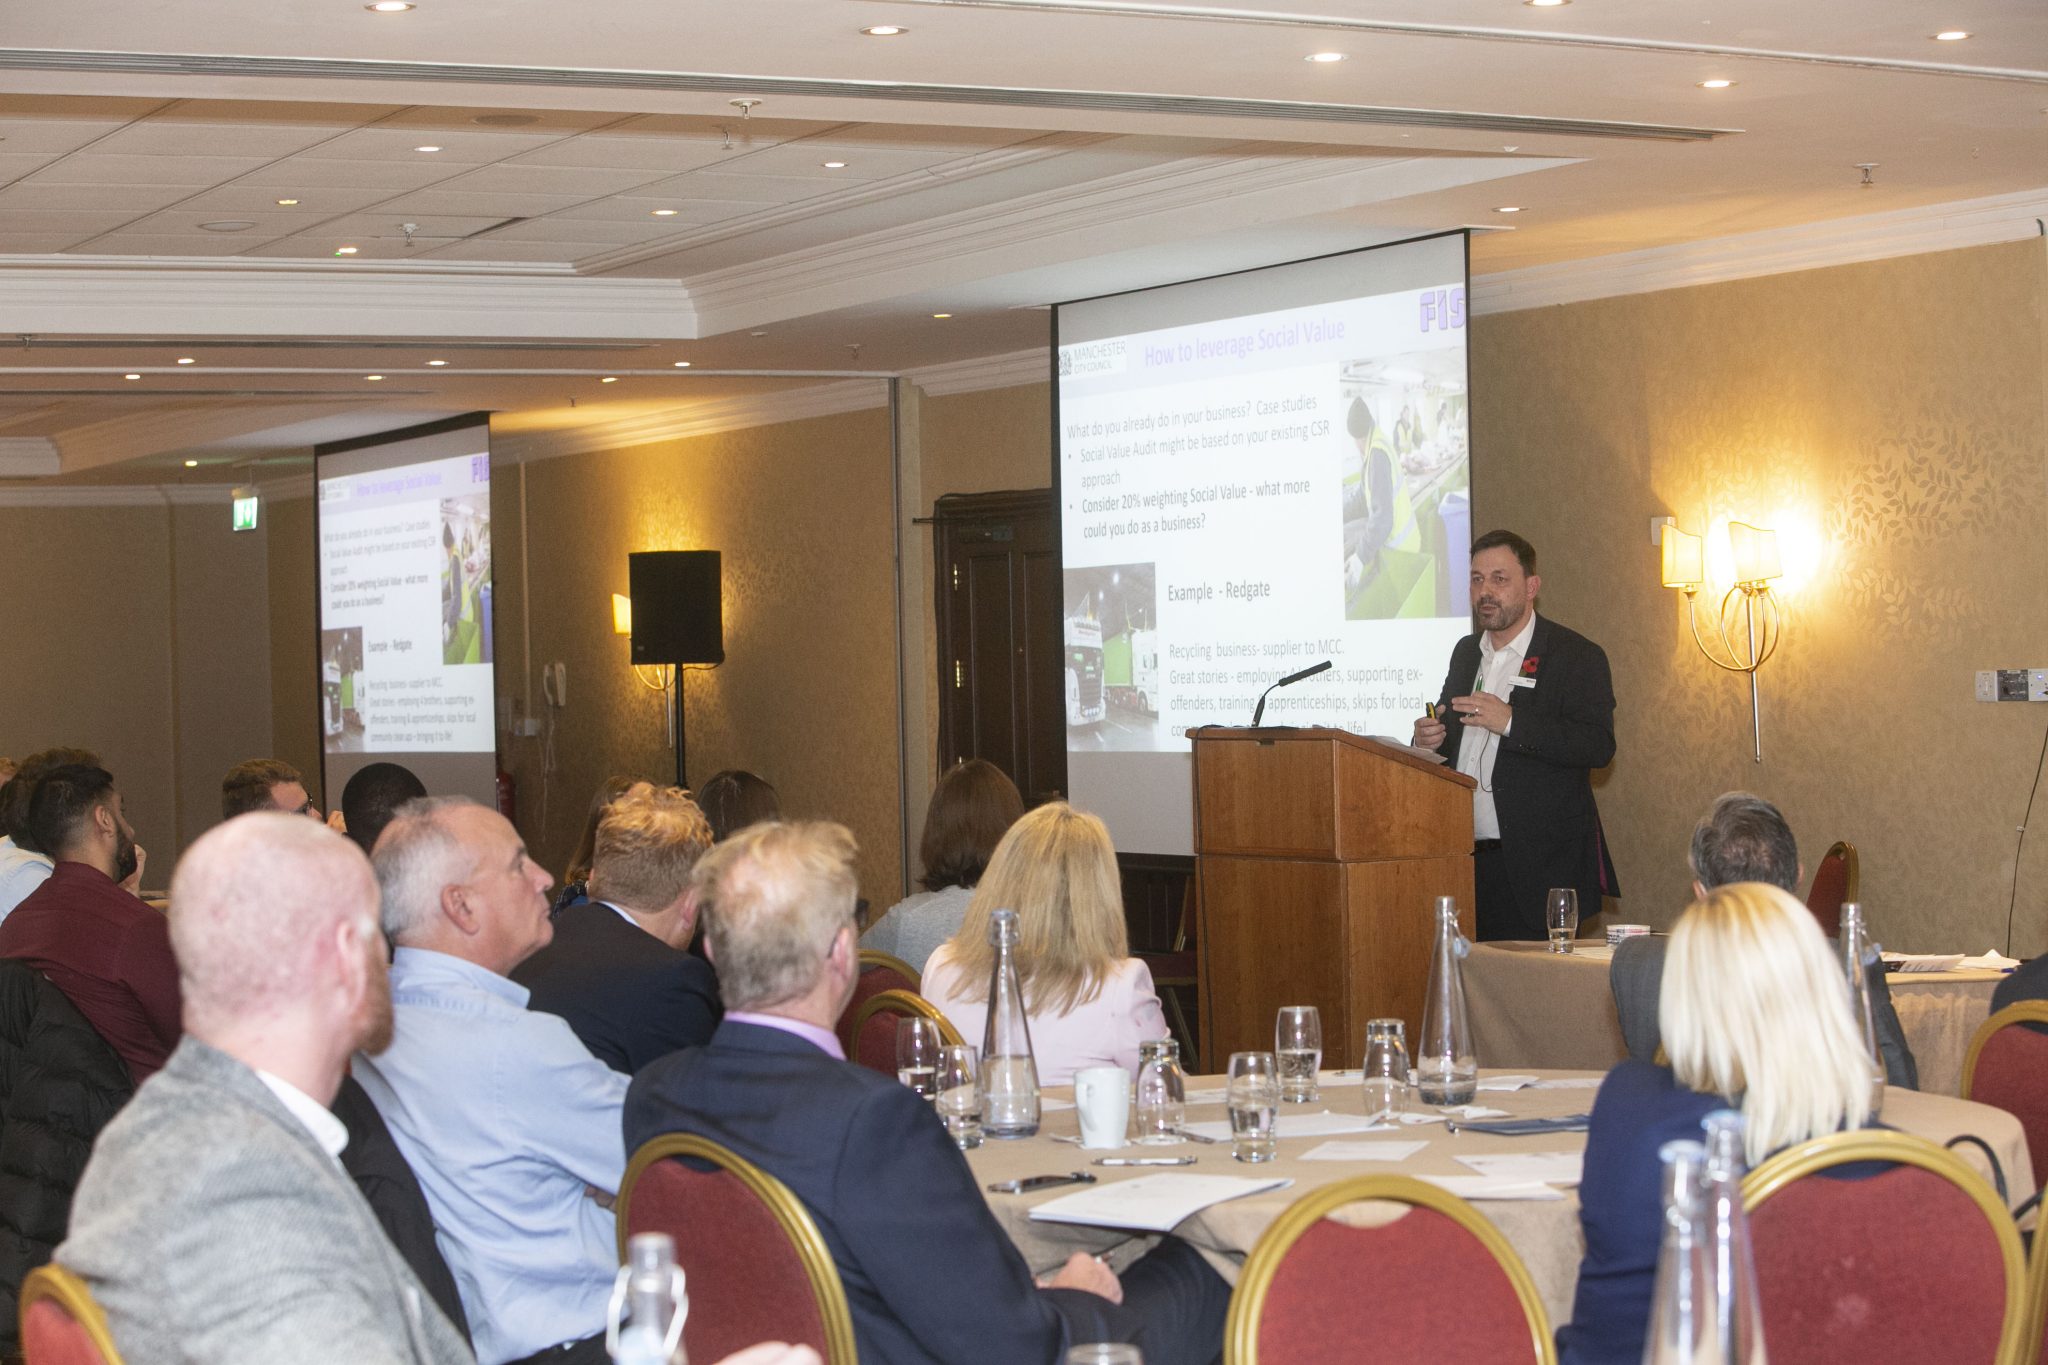 FIS provides best practice guidance and advice to support members at annual conference